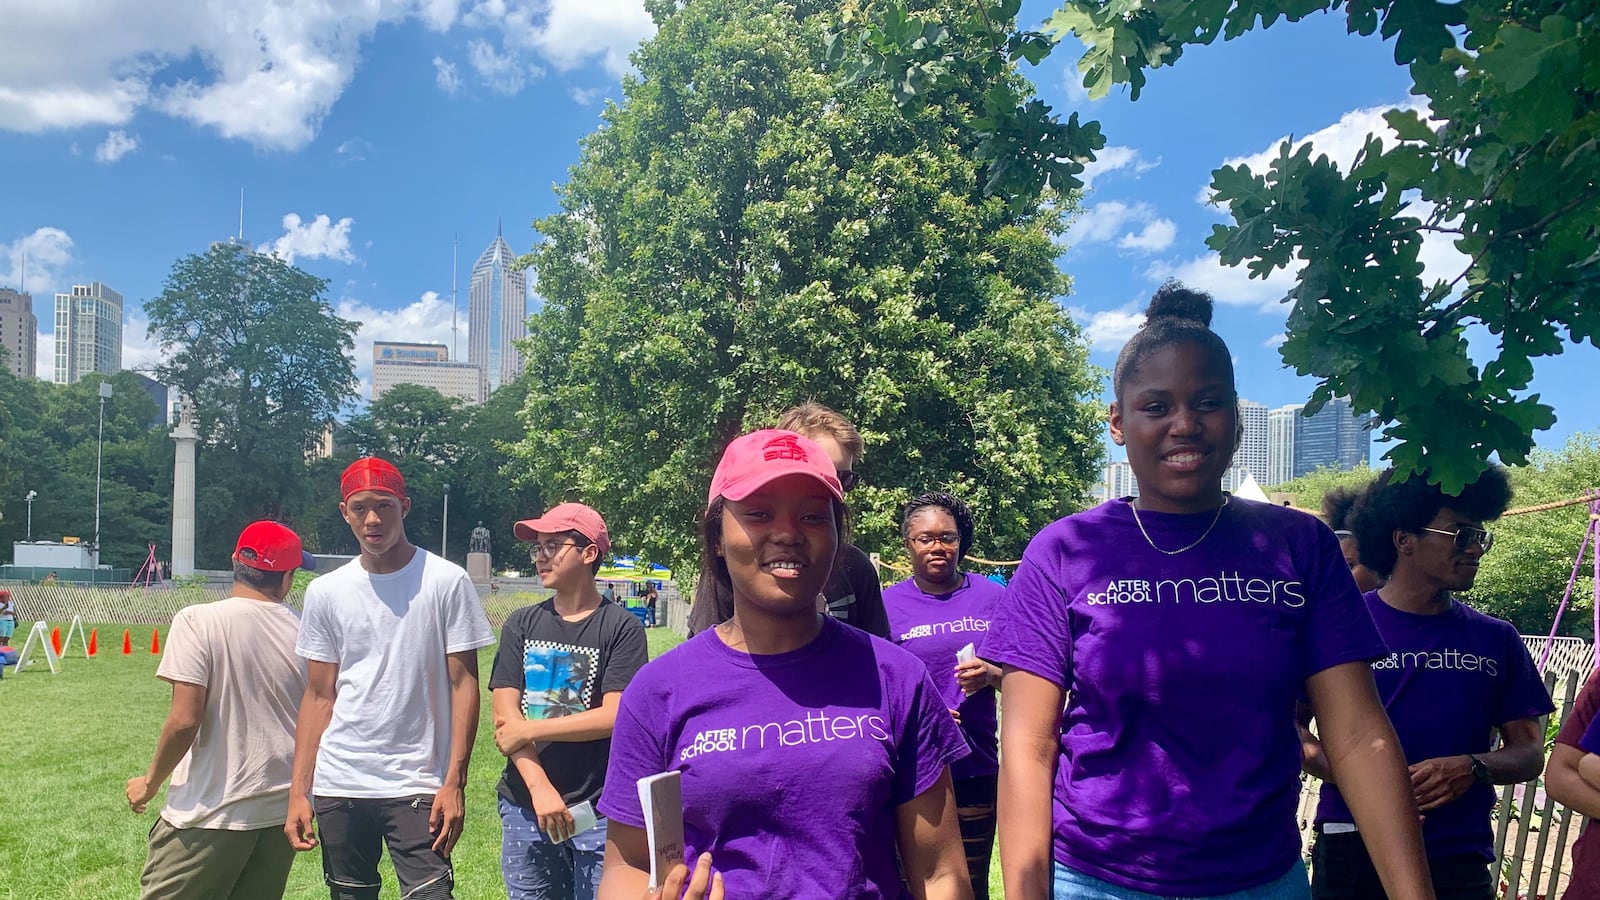 Kennedy Woodfork, left, and Alyssa Goodwin, participating in a summer program with the the Urban Grower’s Collective, lead a tour of their community garden in Grant Park on July 10.